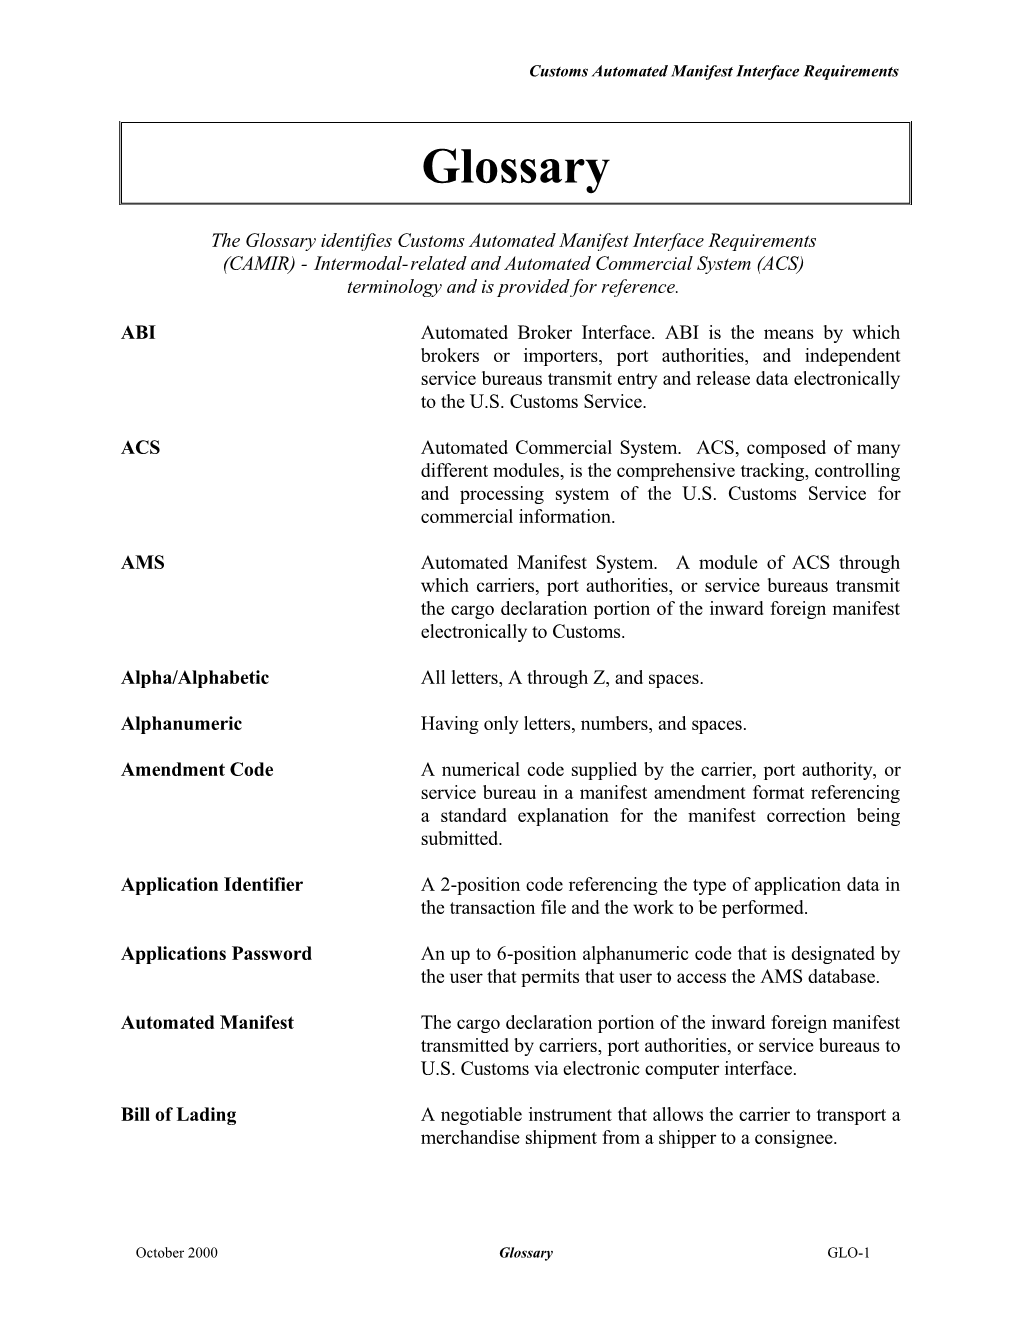 @SCHEDULE D = The Glossary Identifies Customs Automated Manifest Interface Requirements (CAMIR) - Intermodal-Related And Automated Commercial System (ACS) Terminology And Is Provided For Reference